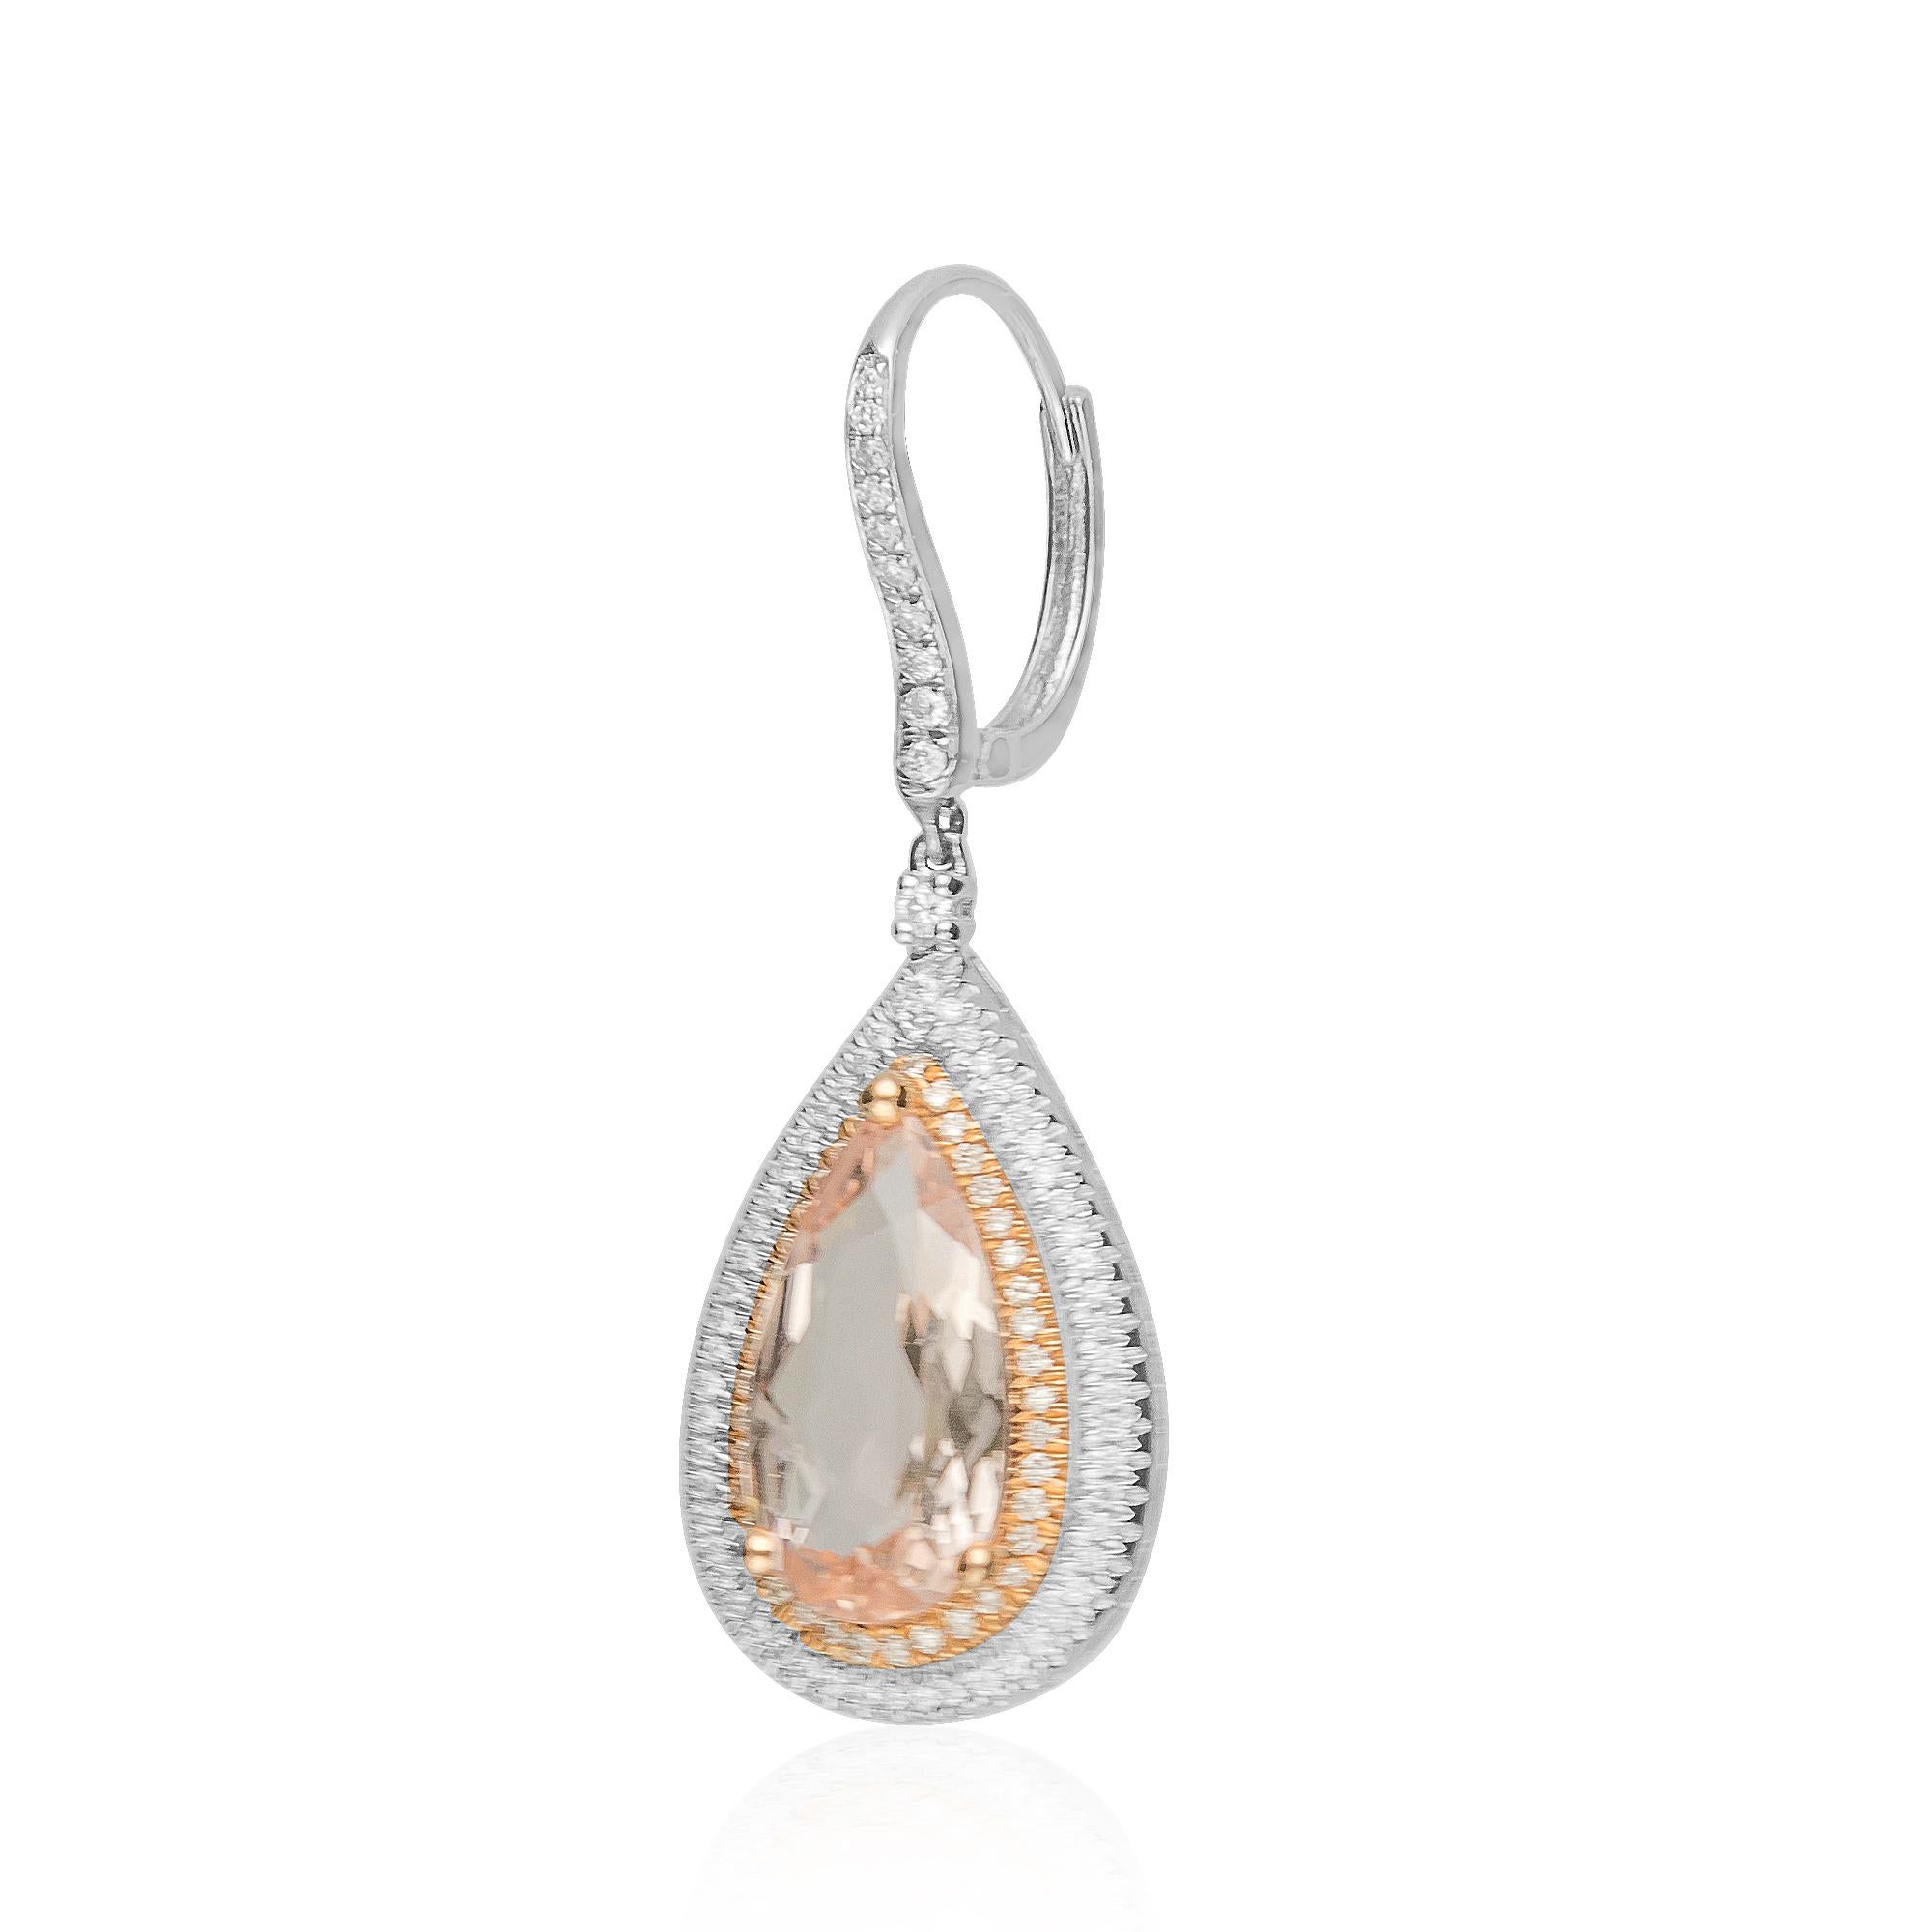 This one of a kind Lever back Earring is crafted in 14-karat rose and white Gold and features 2 Pear shaped Morganite 6.88 Carat & 208 Round Brilliant cut Diamonds 0.72 Carat. This Earring is a perfect gift either for yourself or someone you love.